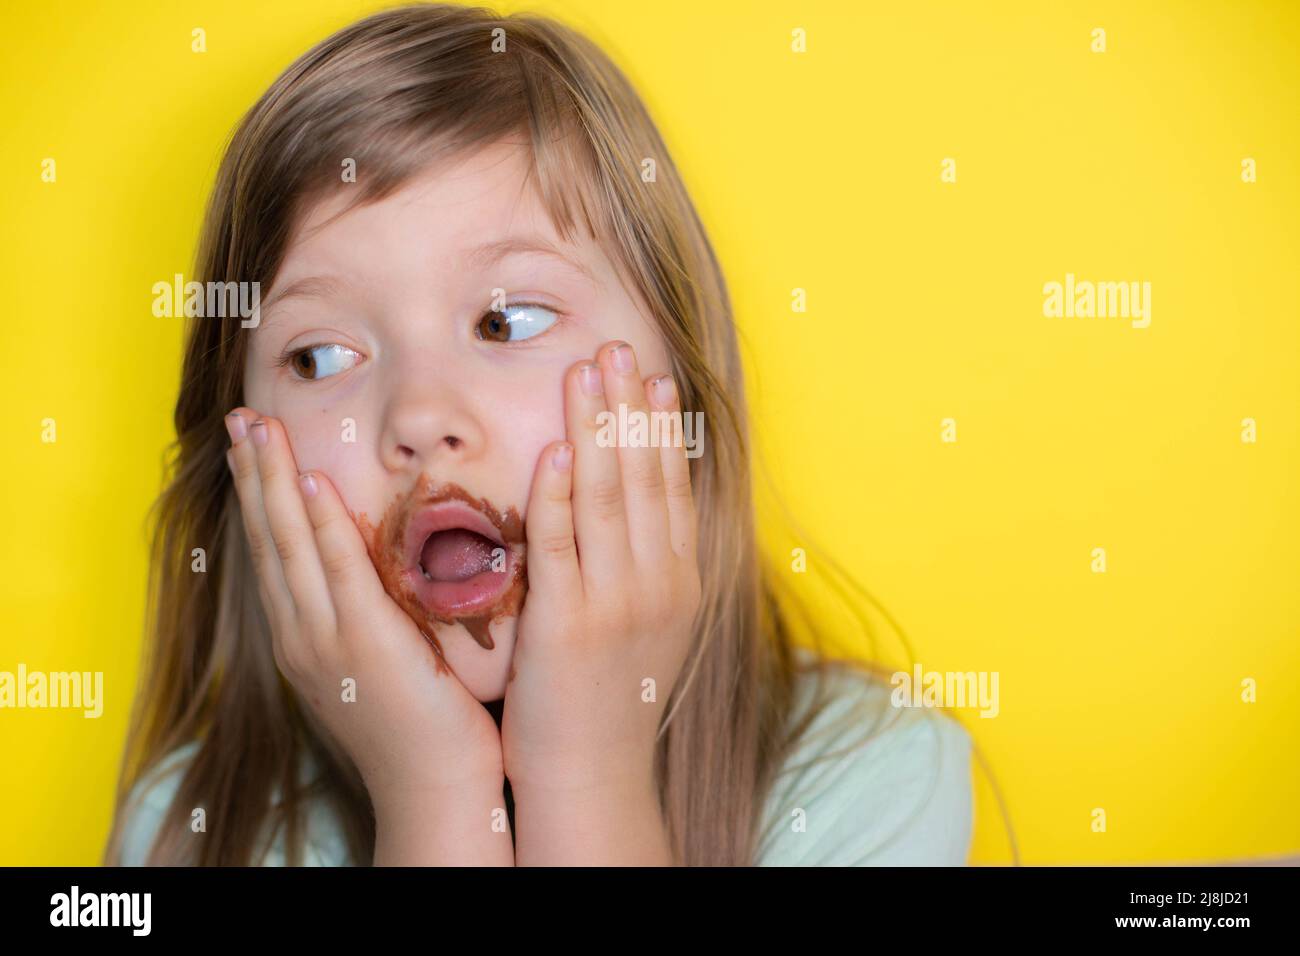 Frightened little girl eating chocolate dirty face Stock Photo